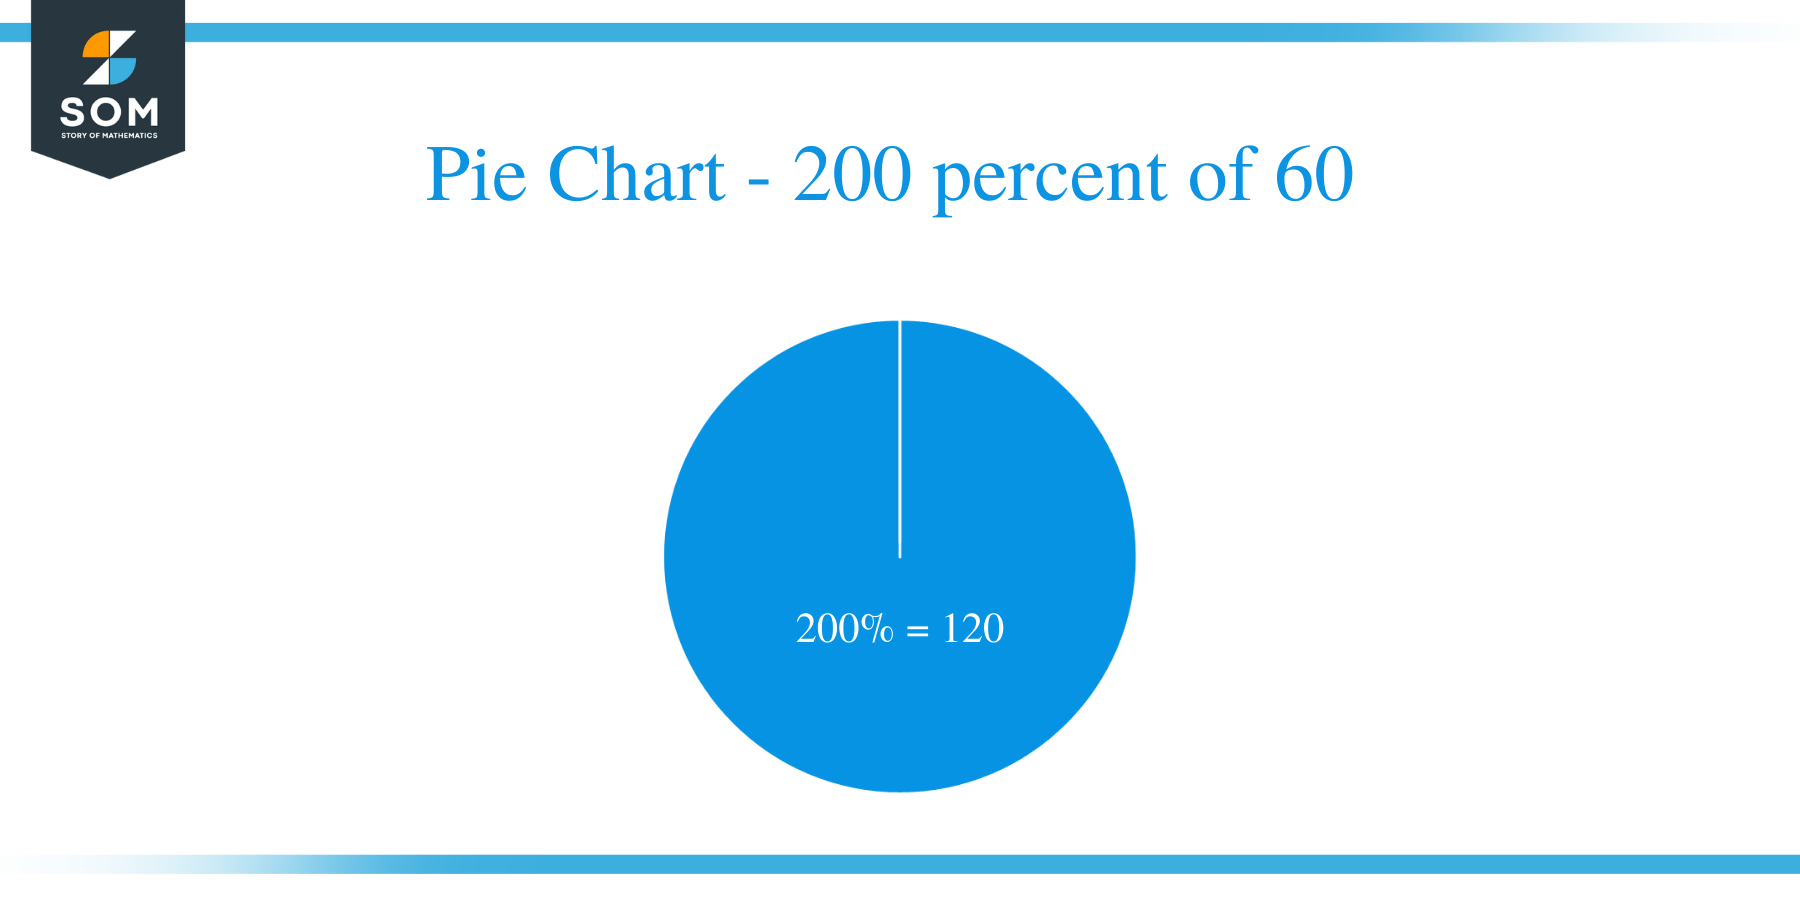 pie chart of 200 percent of 60